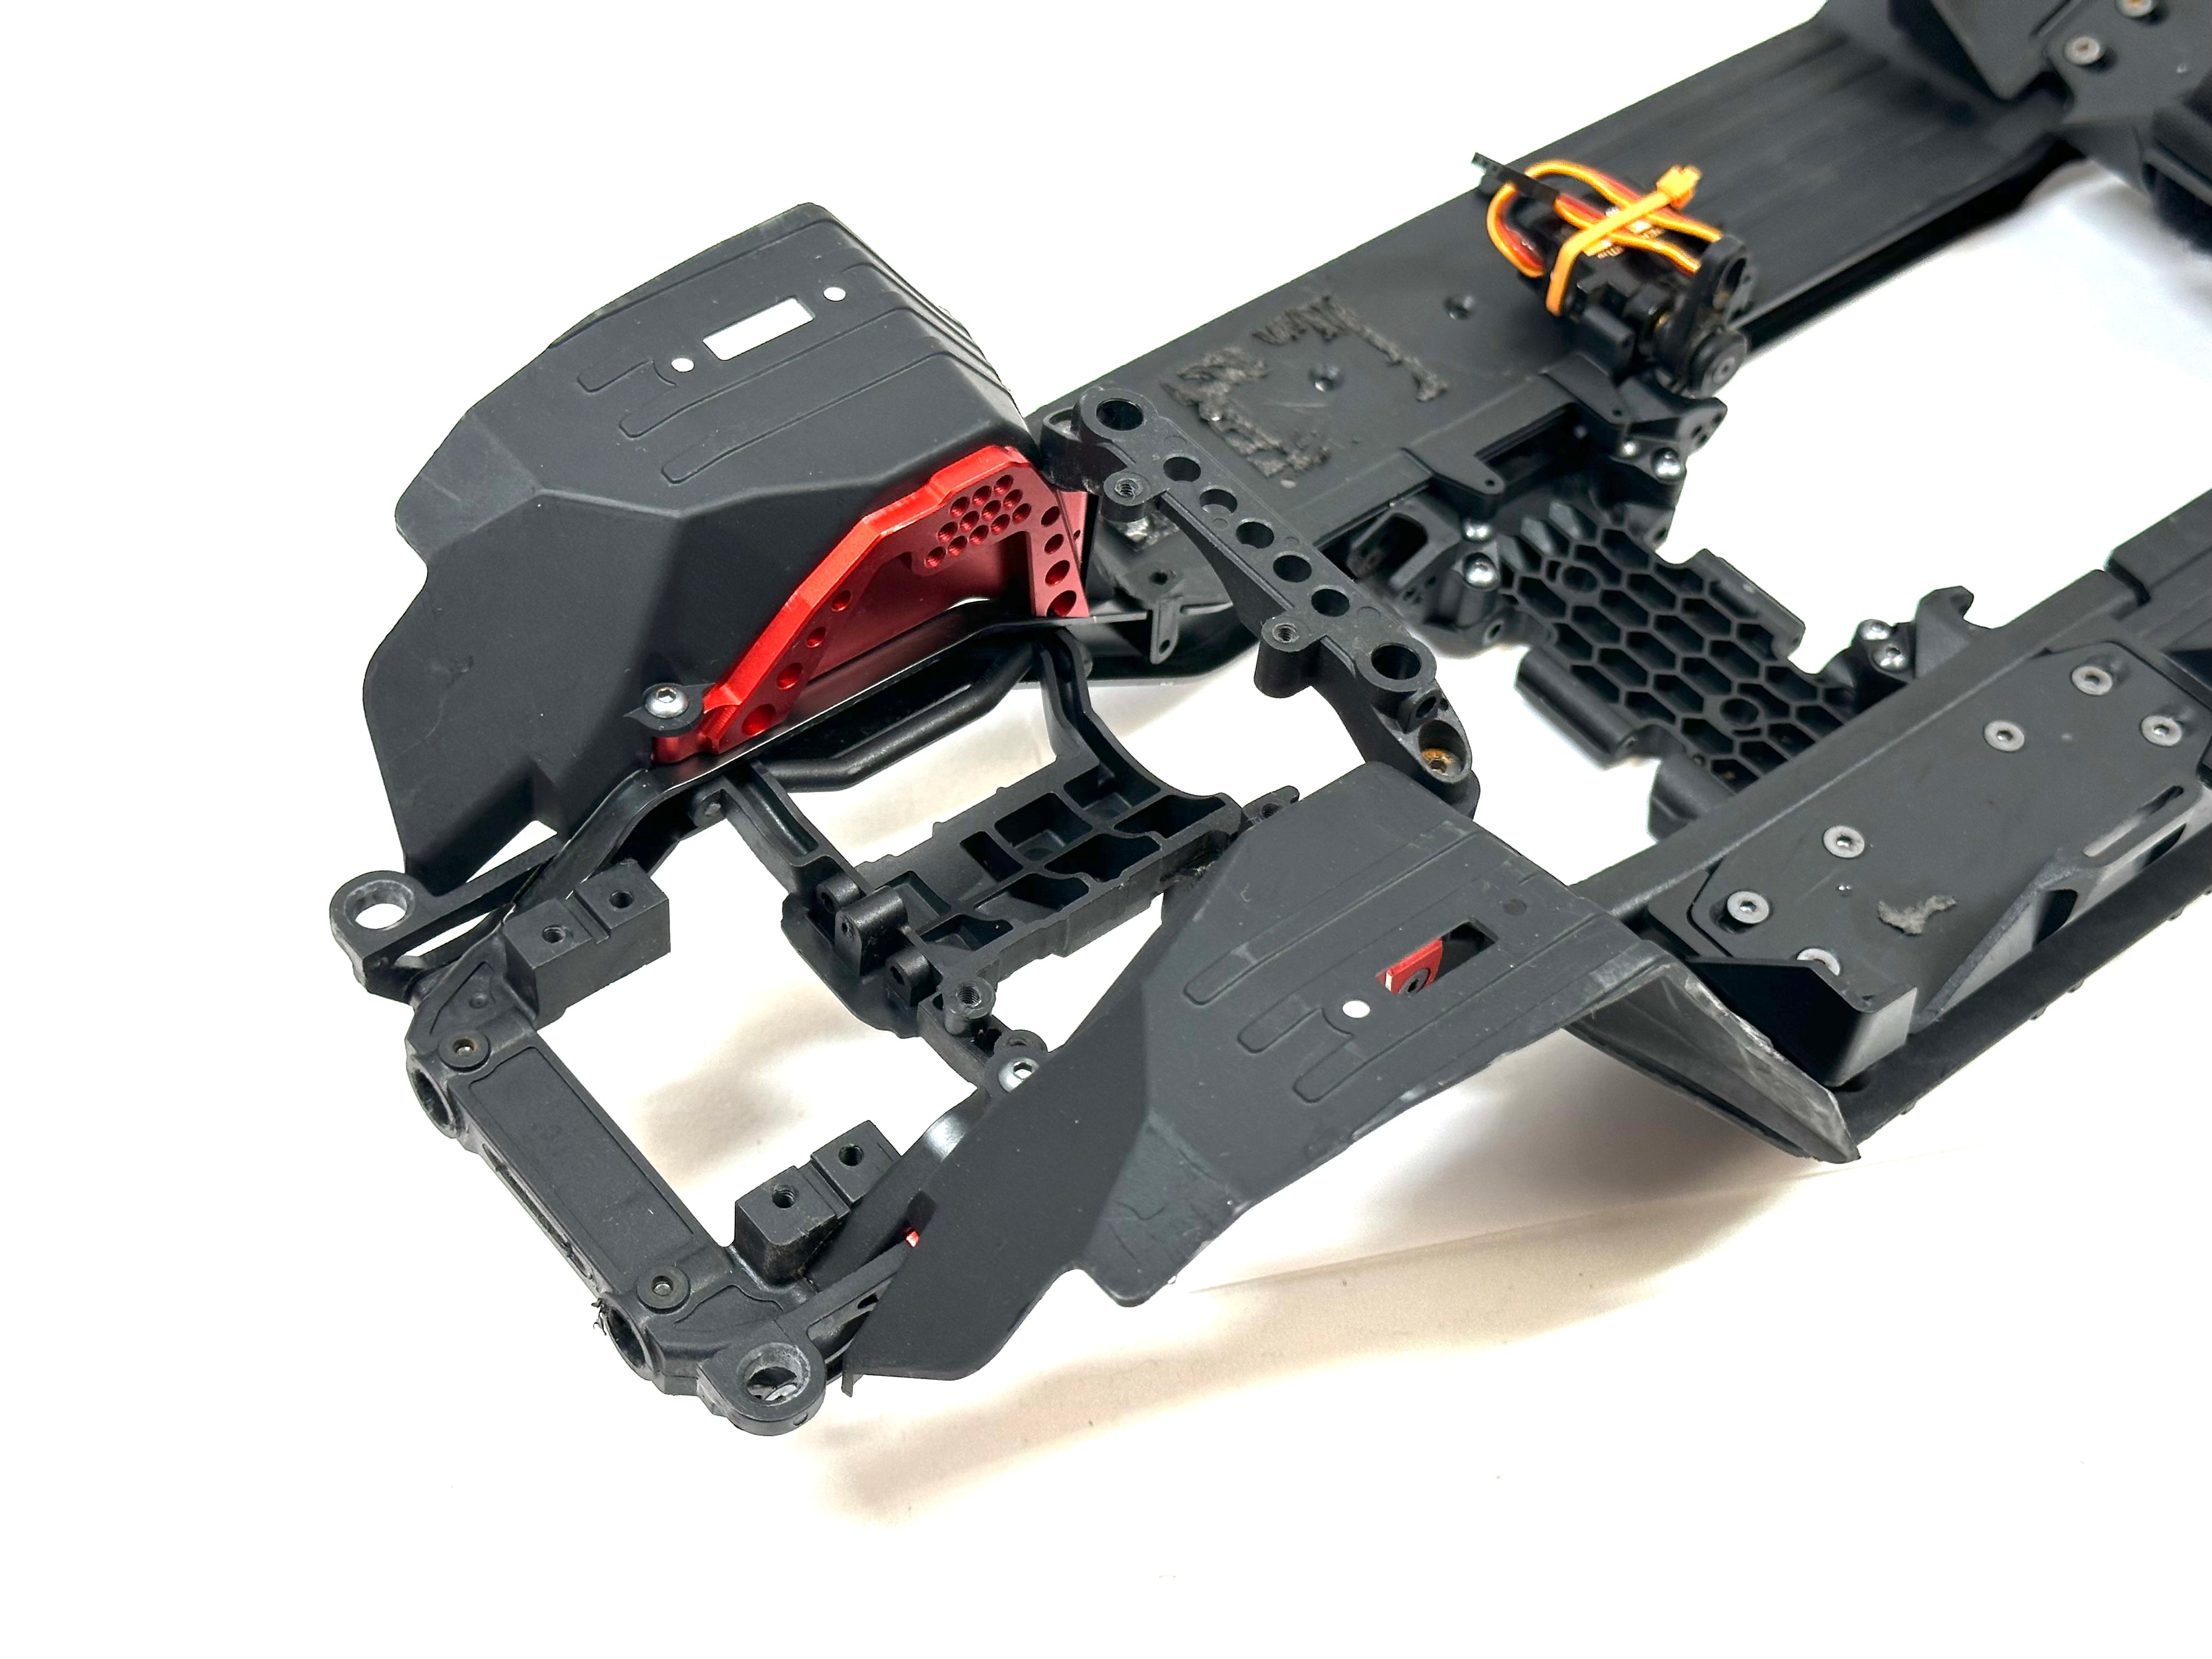 Axial SCX10iii Gladiator Chassis